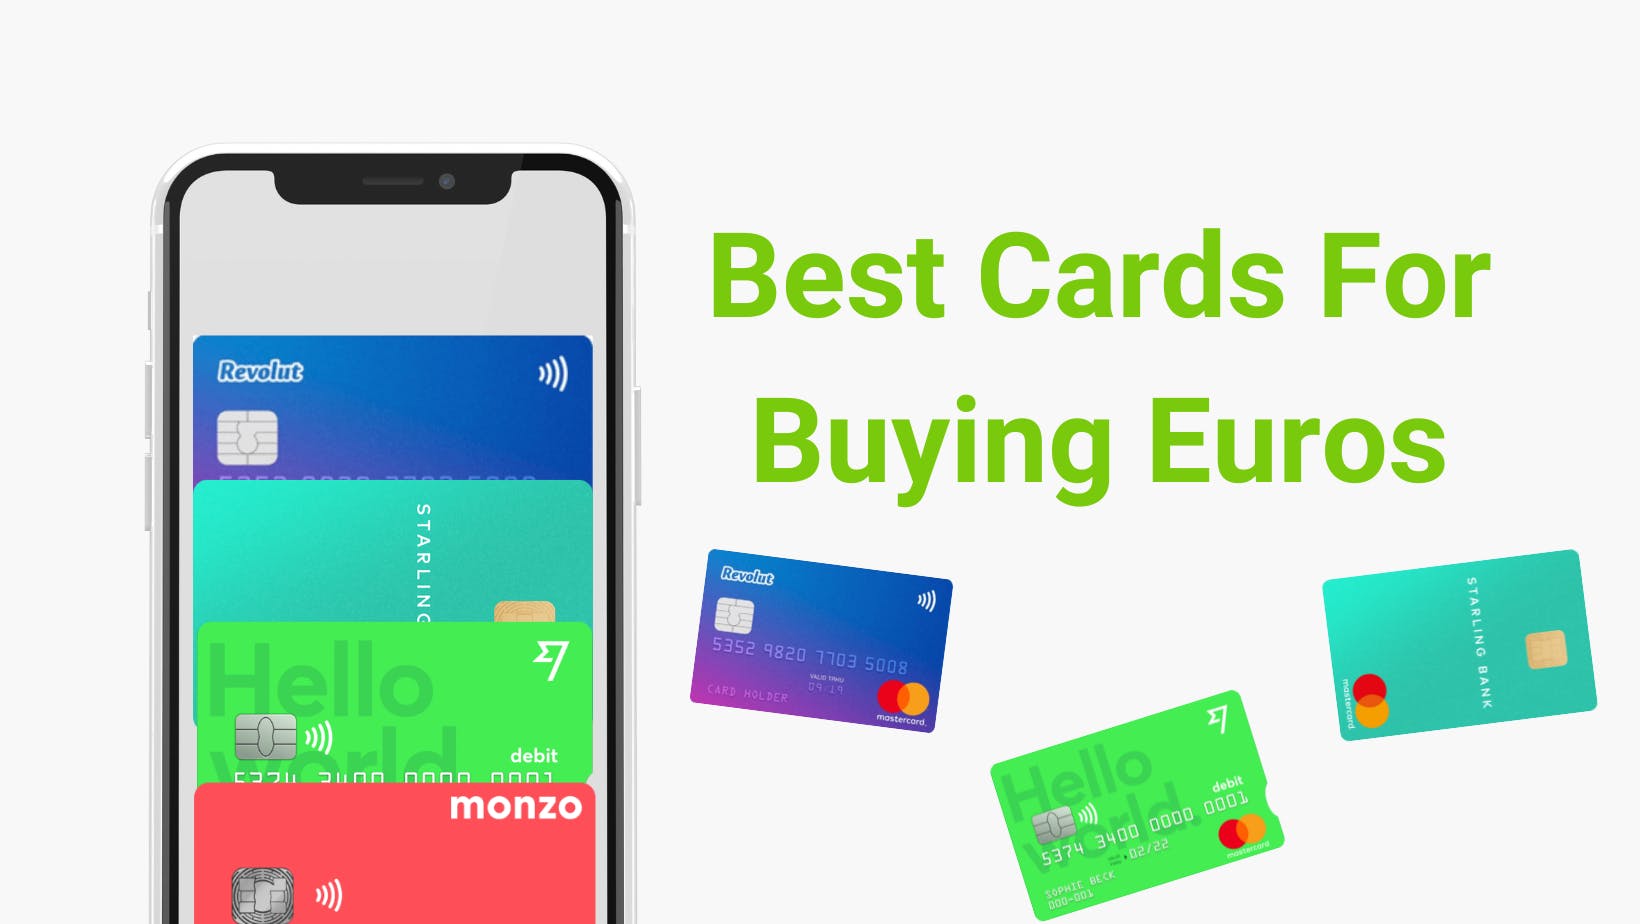 Best Card for Buying Euros in UK